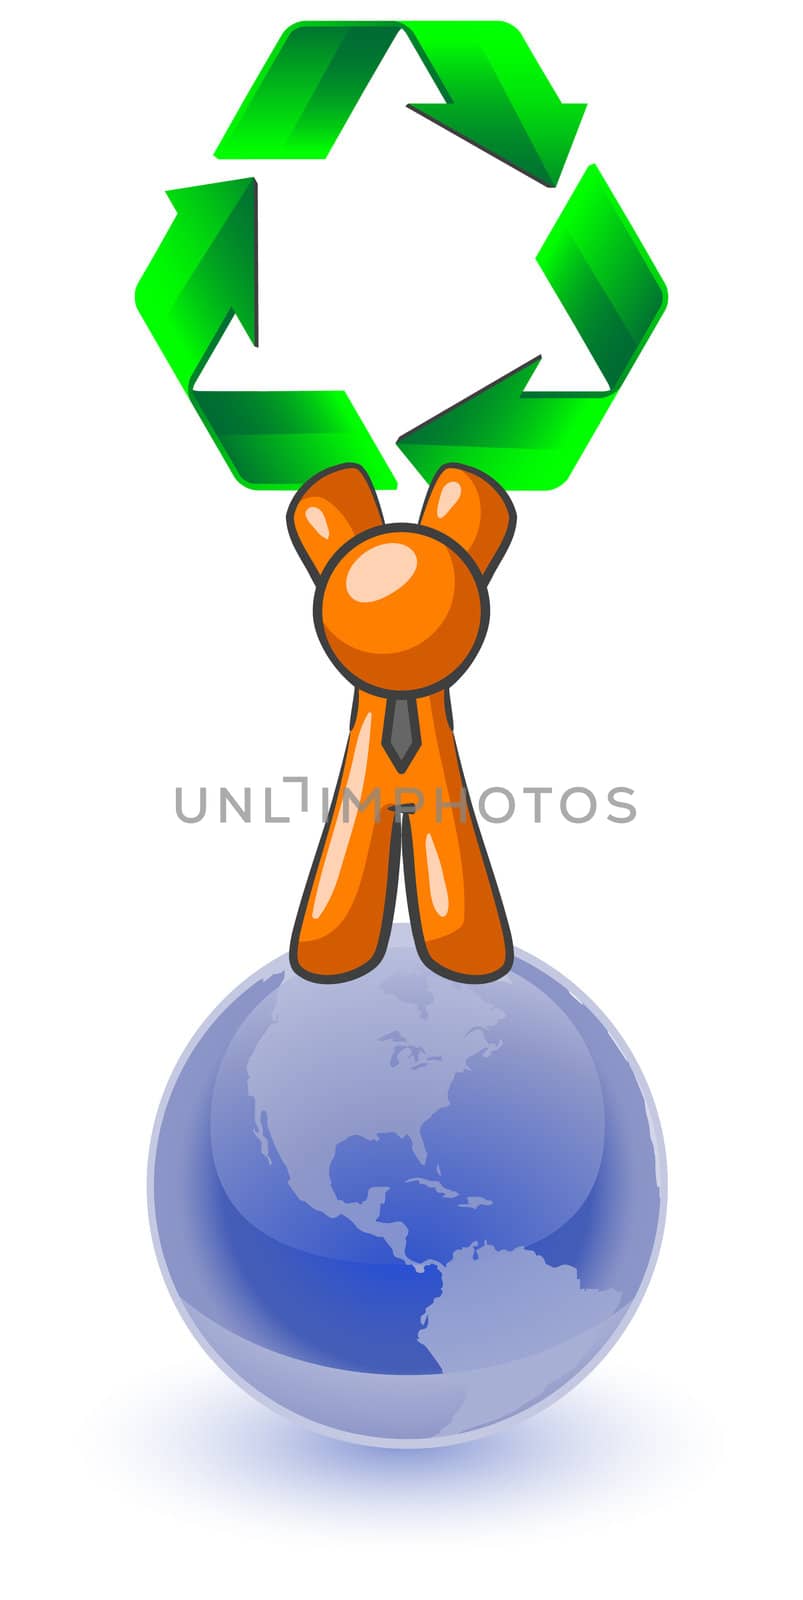 An orange man standing on top of the earth holding a large recycling symbol. Good concept for environmental earth preservation. 